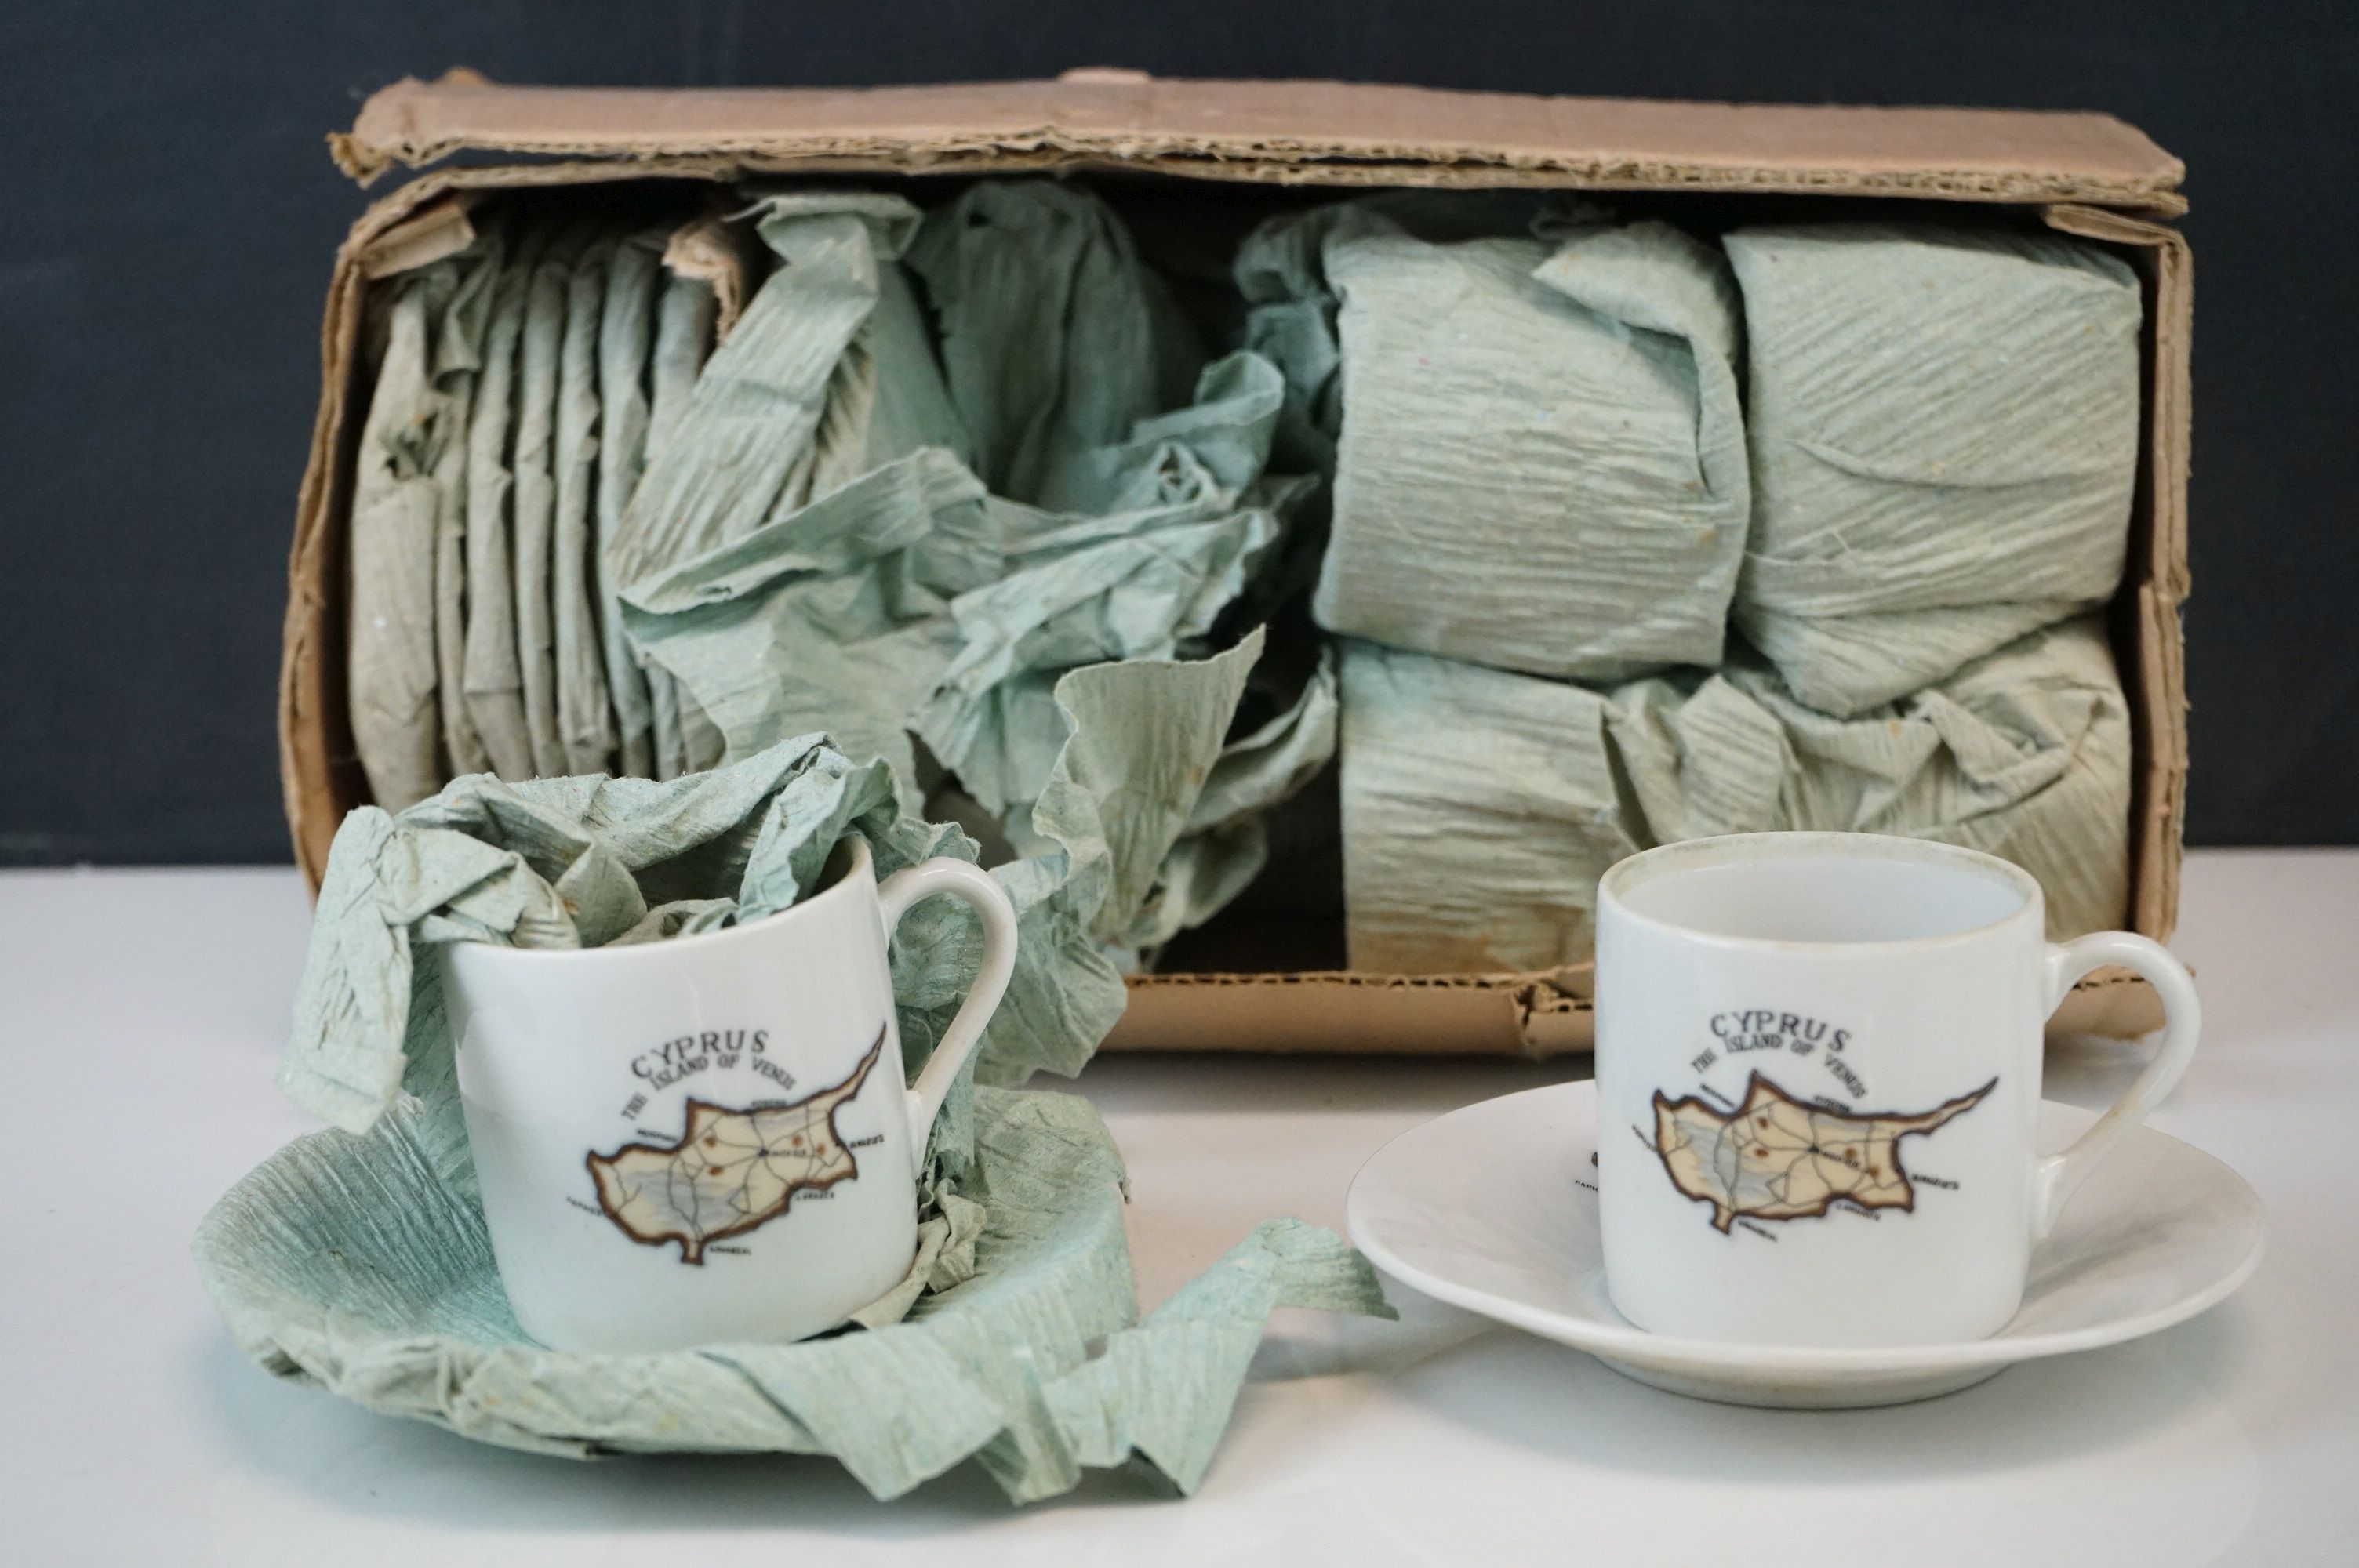 A vintage coffee set decorated with the image of the island of Cyprus.